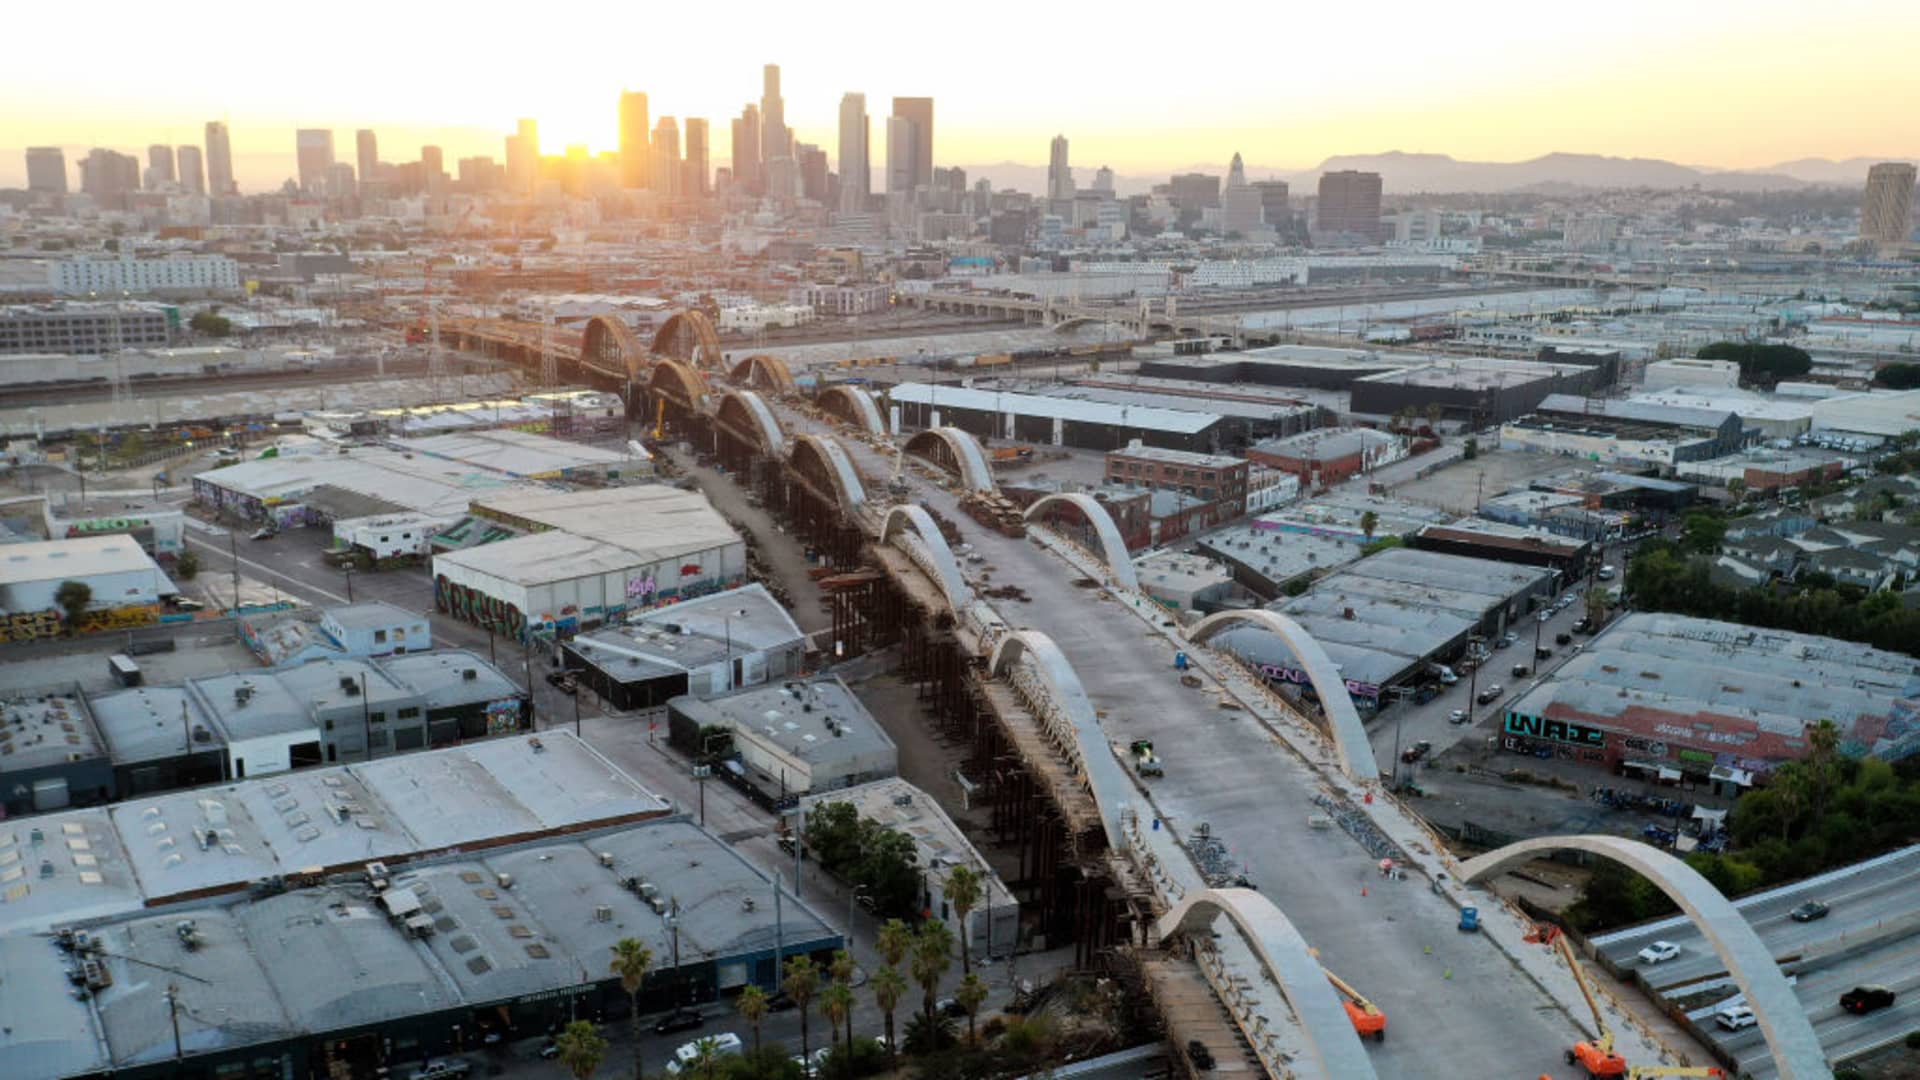 An aerial view shows construction continuing on the Sixth Street Viaduct replacement project, connecting Boyle Heights with downtown, on July 28, 2021 in Los Angeles, California.